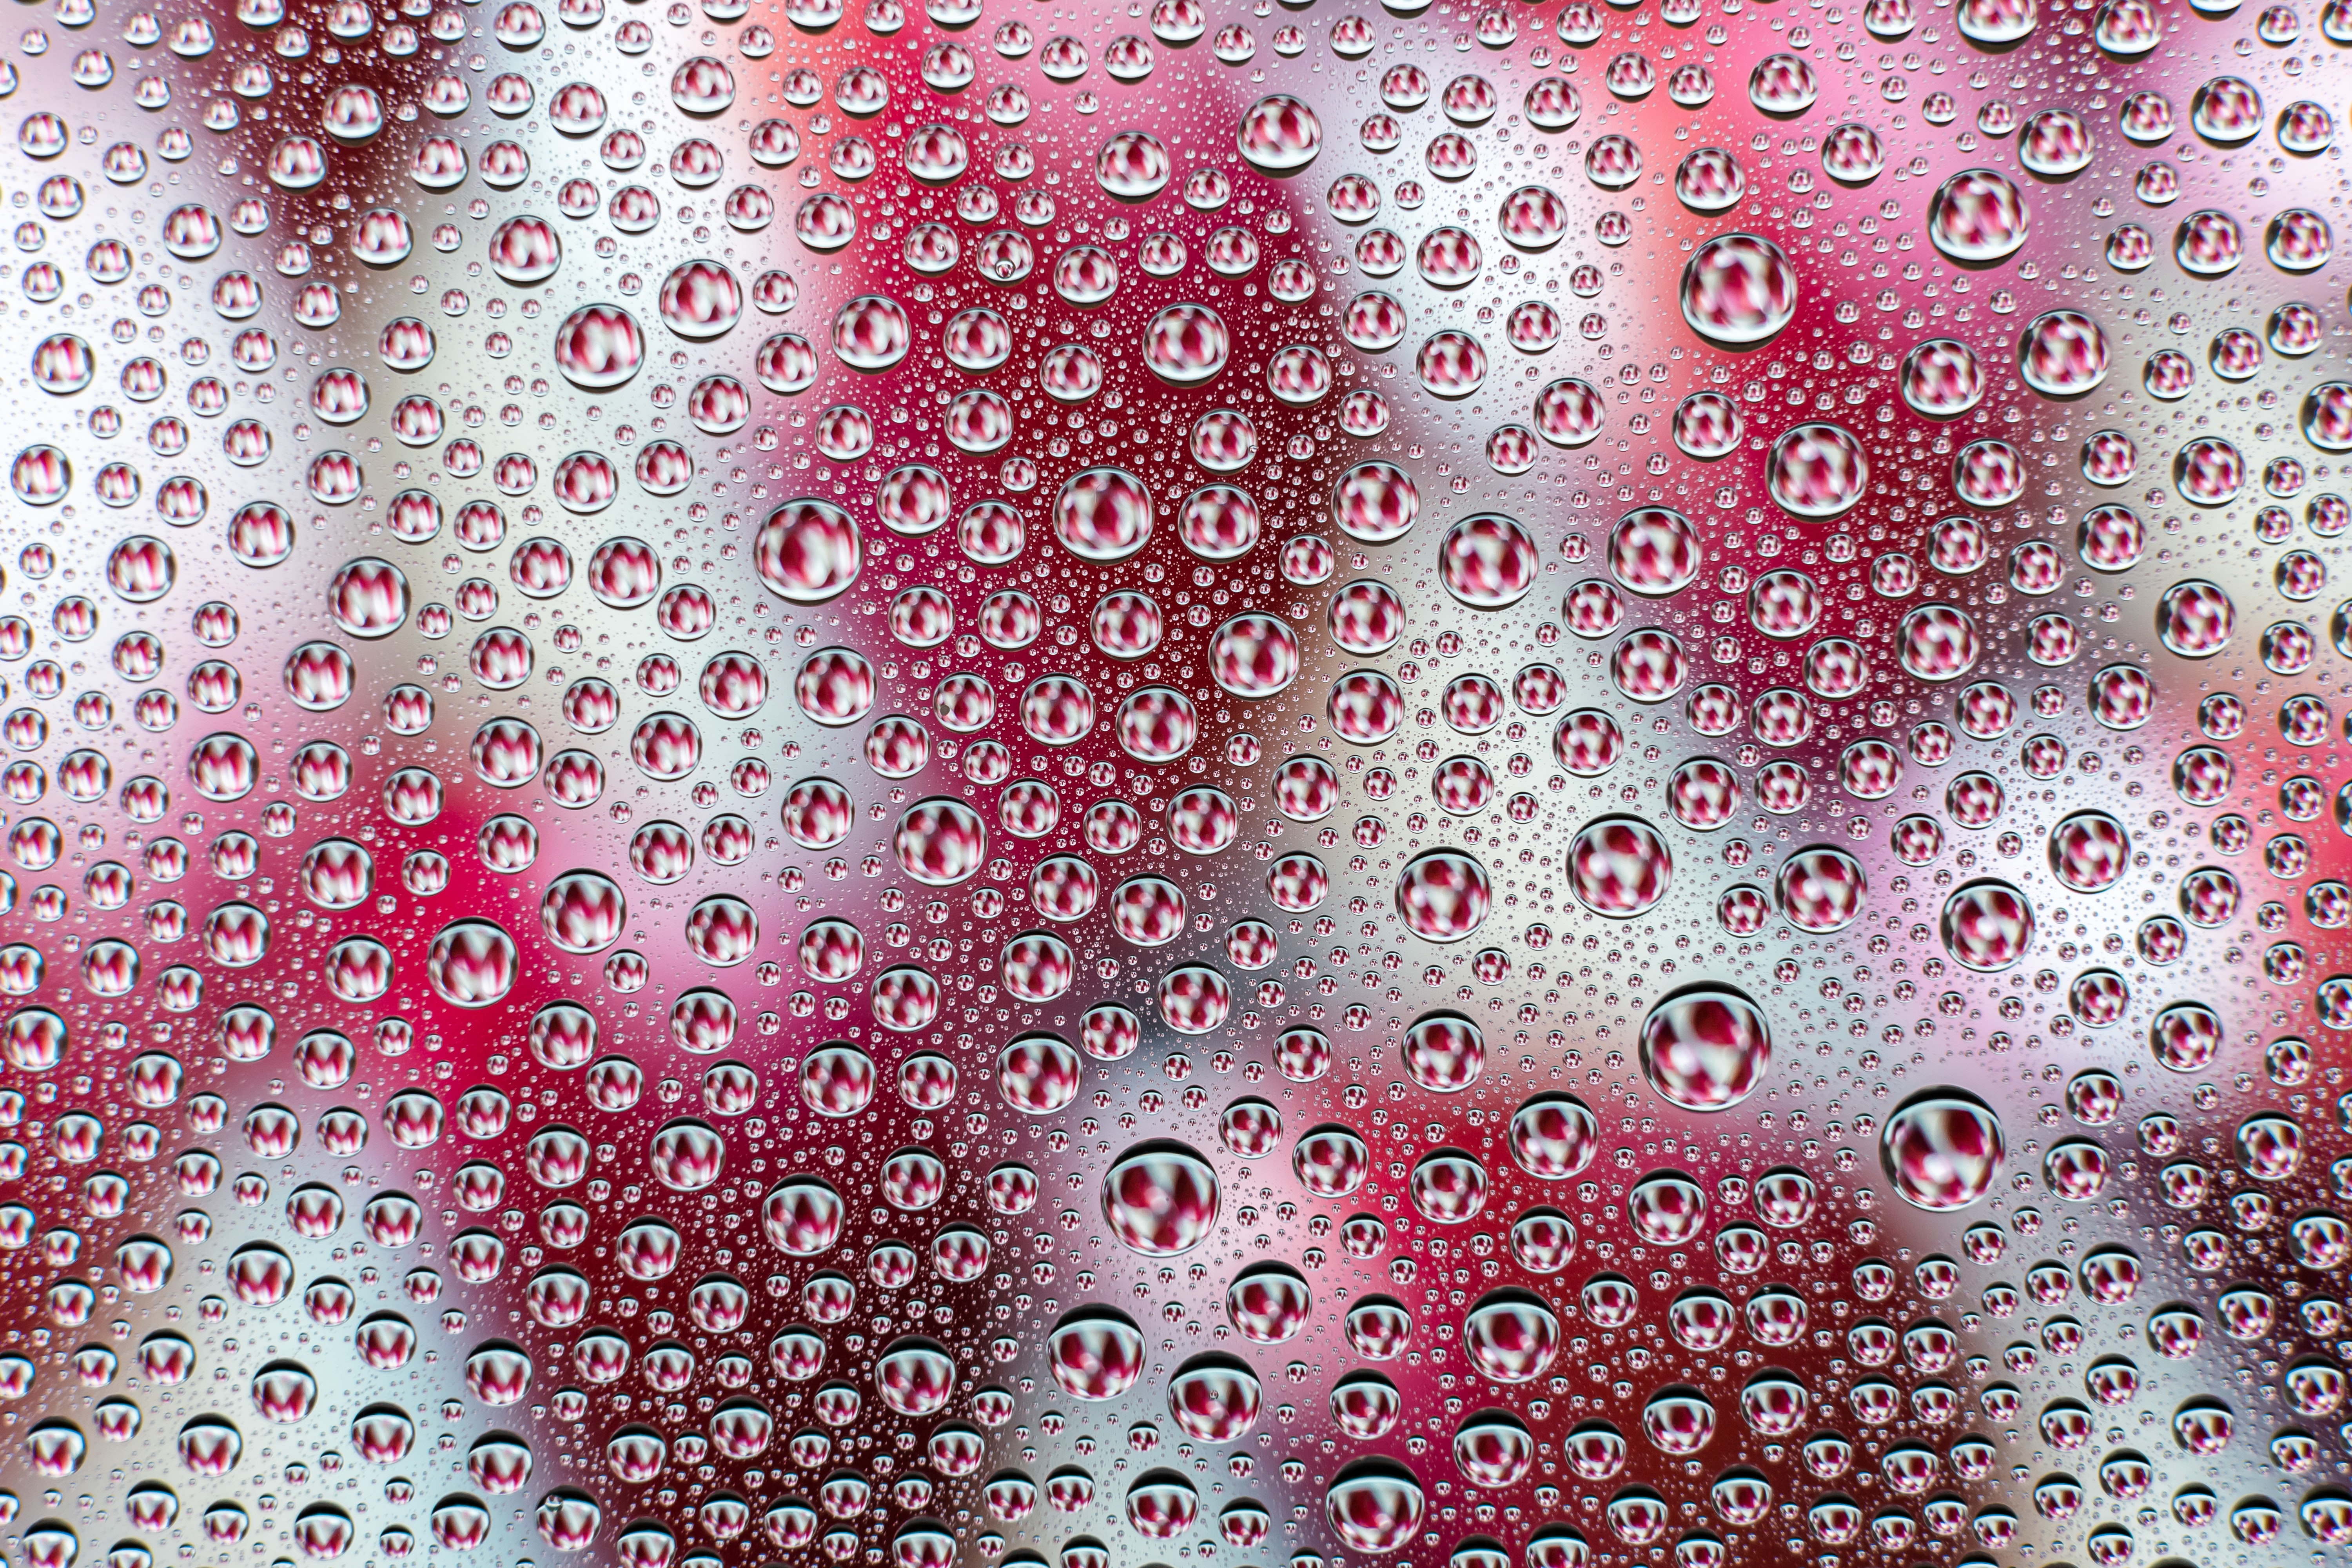 desktop Images smooth, abstract, water, drops, glare, blur